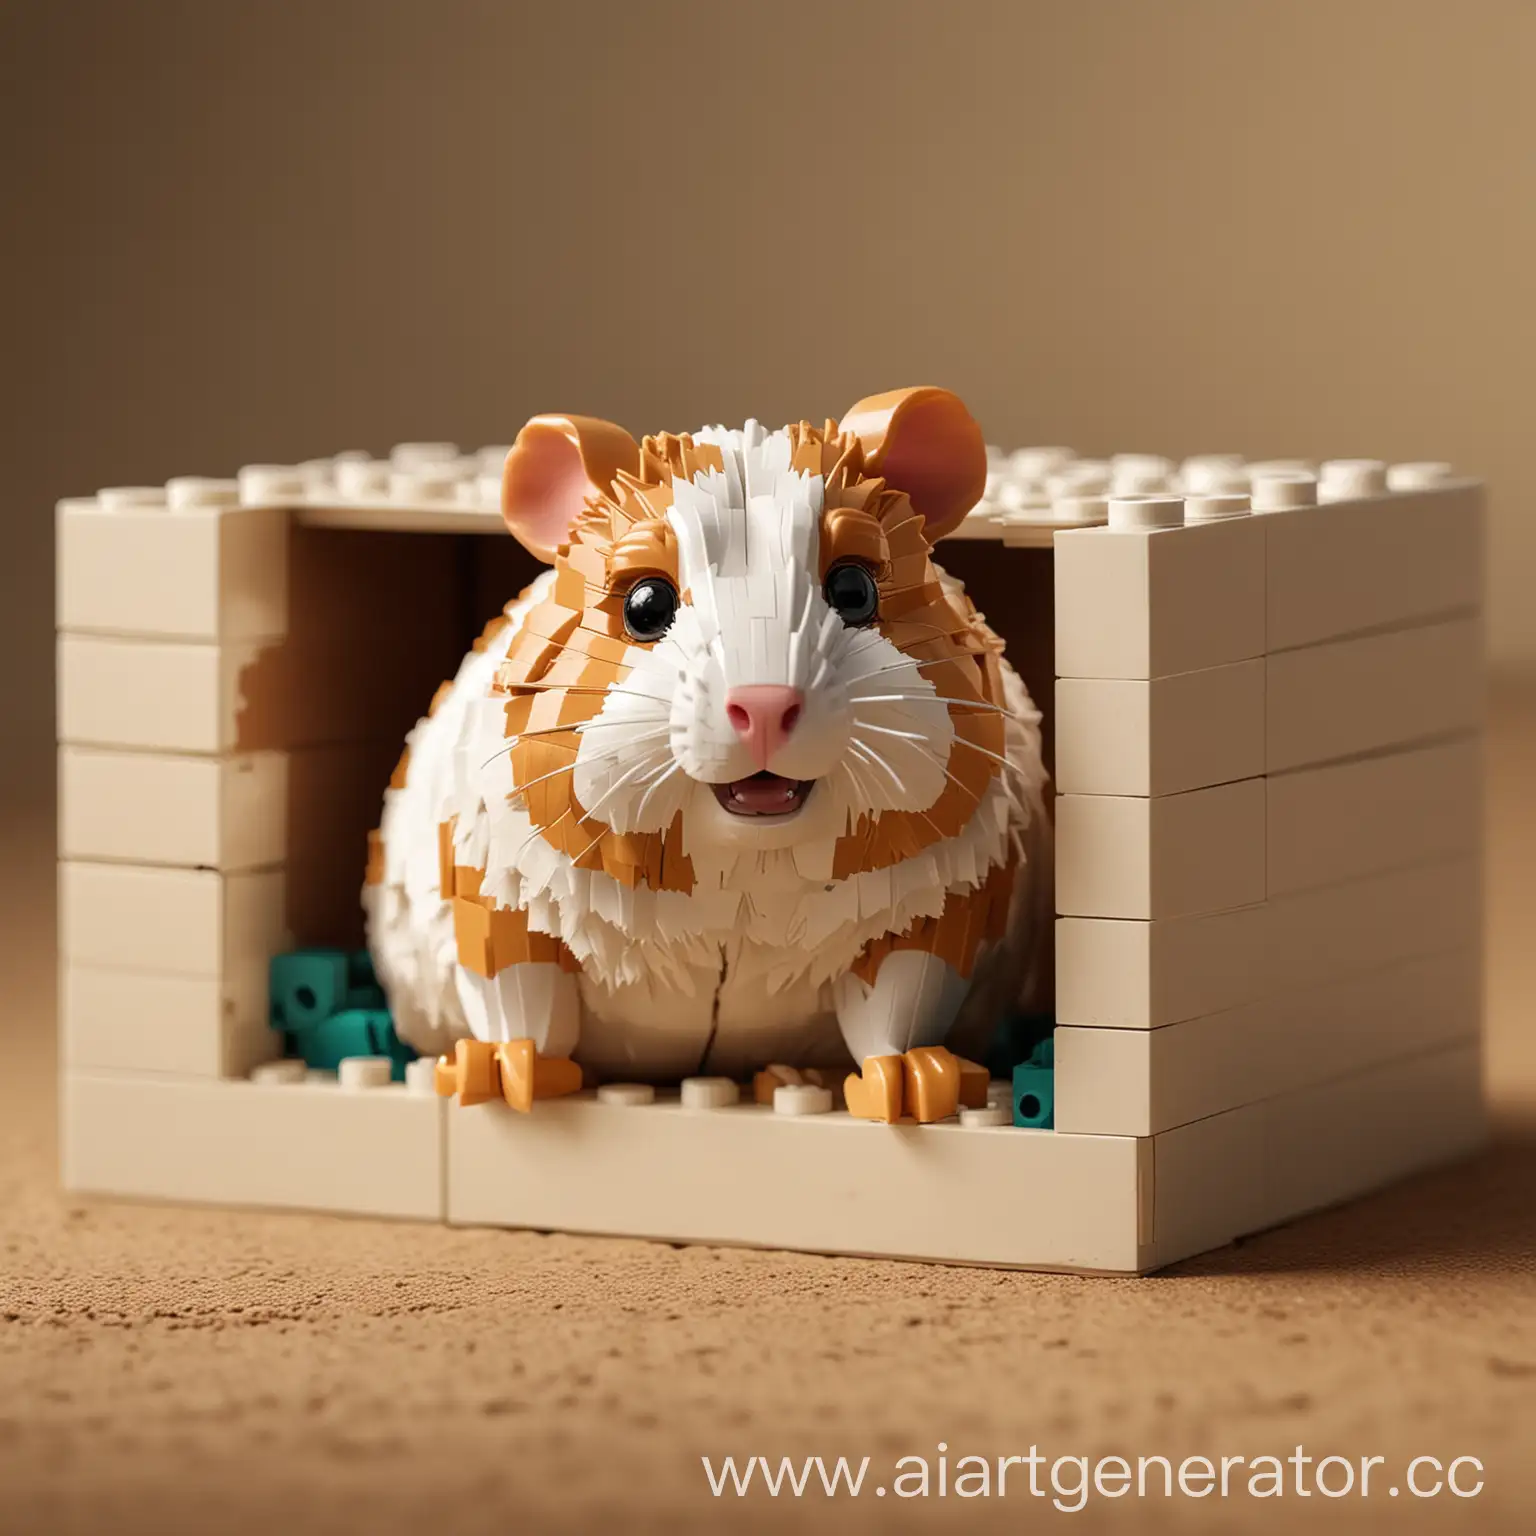 LEGO-Hamster-Model-on-Colorful-Box-Background-in-High-Resolution-8K